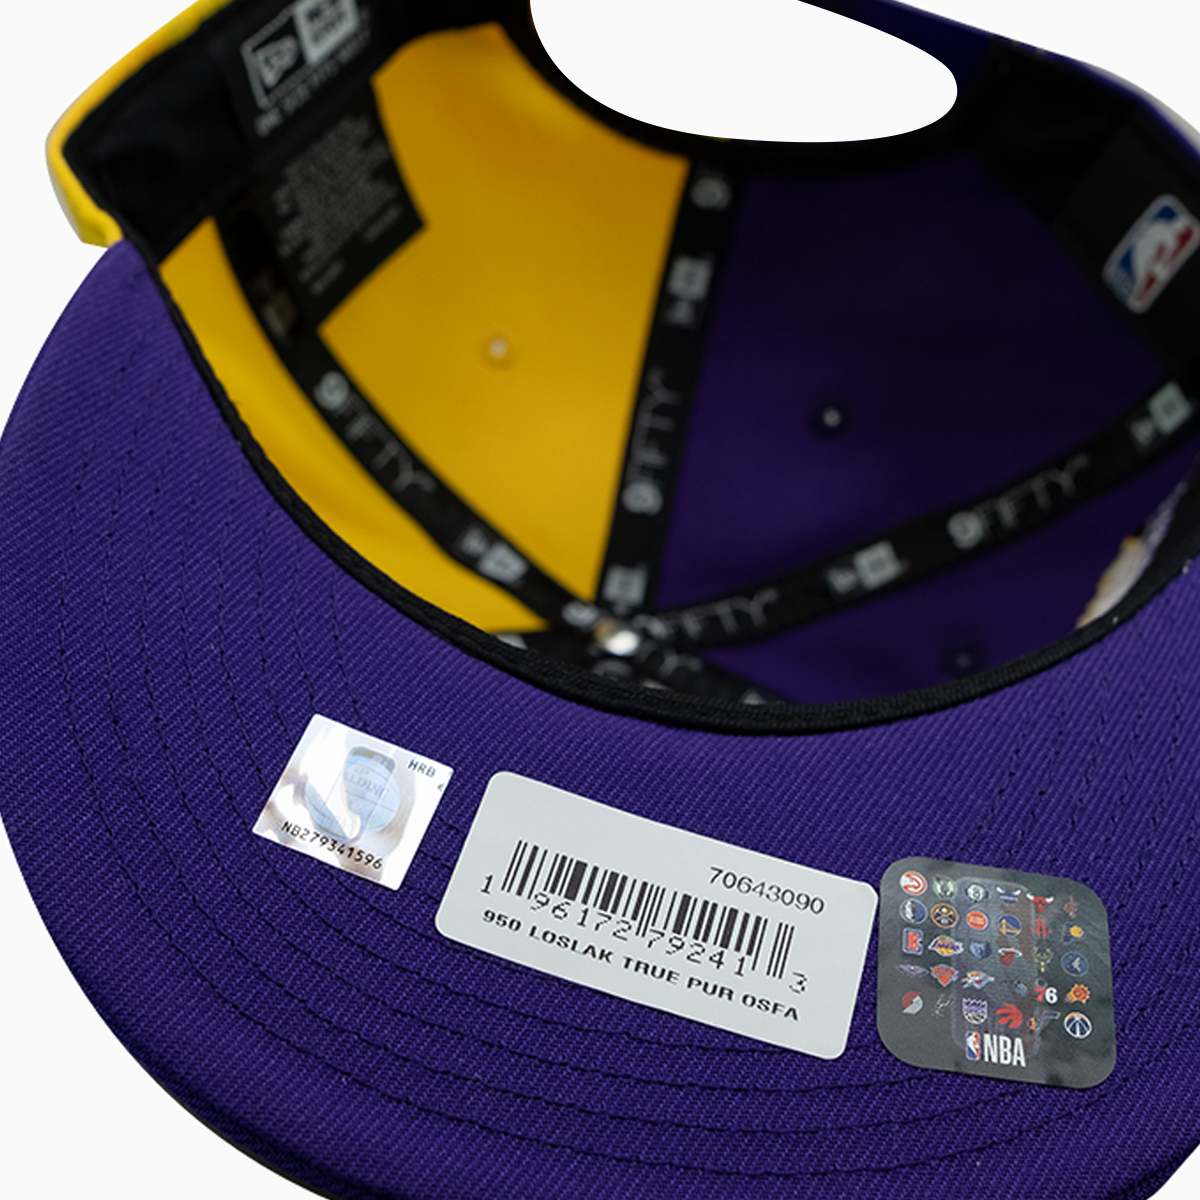 New Era 59Fifty Los Angeles Lakers 17x Purple Bottom Men's Fitted Hat